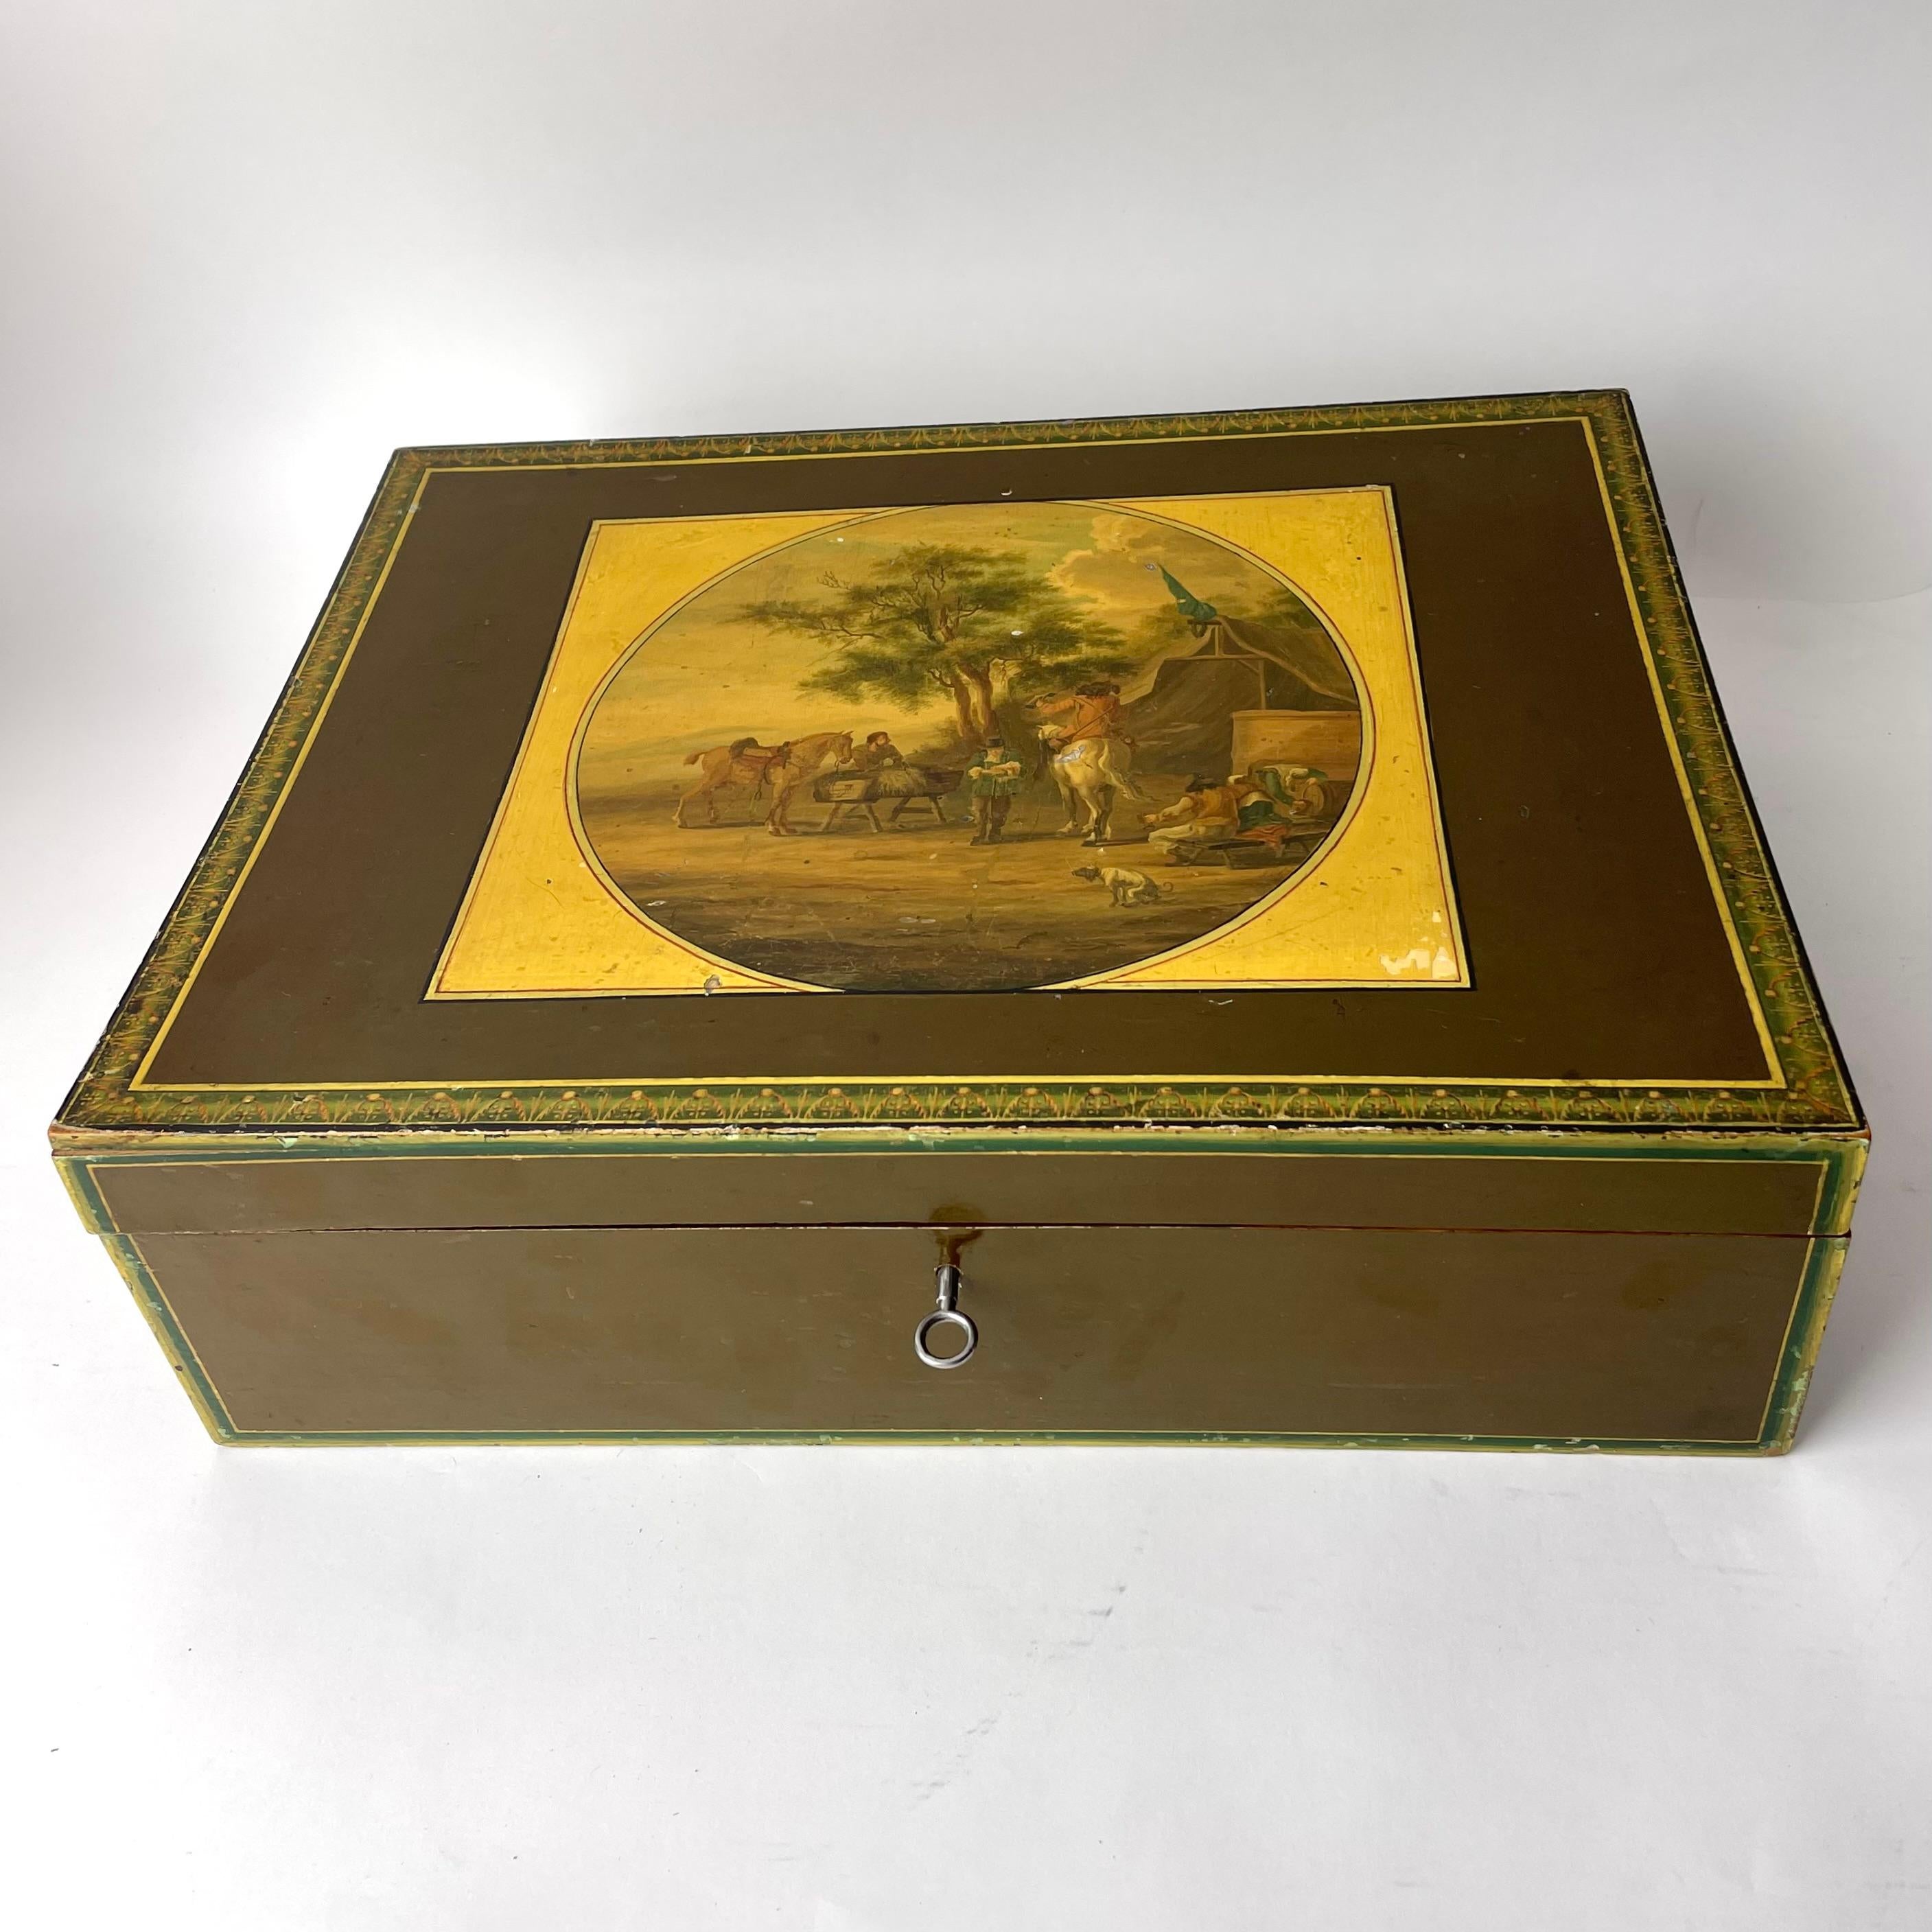 A large and intricately decorated Empire lacquer work sewing box. Early 19th century Europe.

The box is decorated with pastoral scenes and an intricate pattern on the edges. The inside of the box consists of several smaller boxes, also depicting